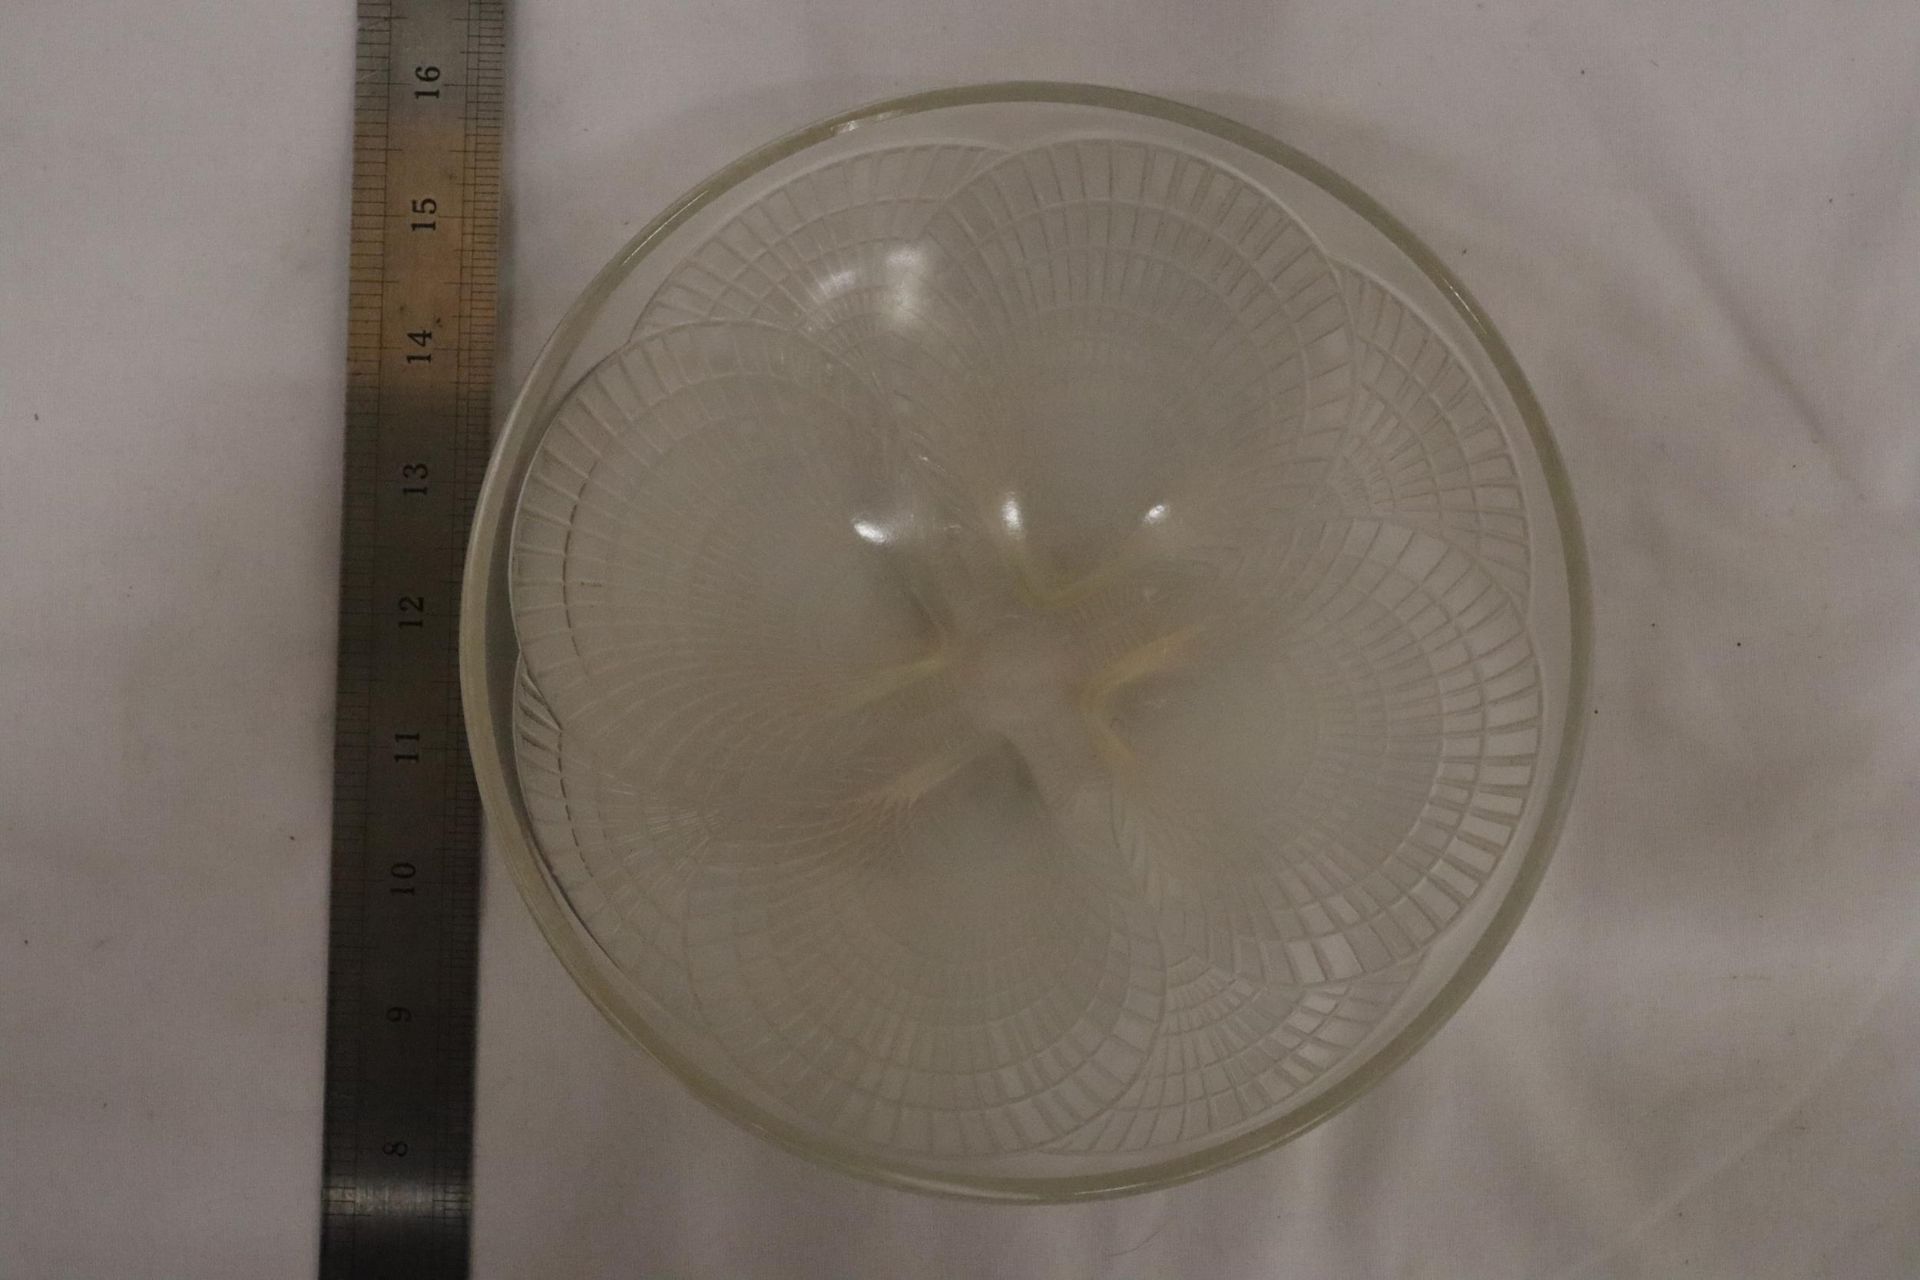 A R LALIQUE FRANCE NO 3202 COCQUILLES PATTERN GLASS BOWL SIGNED TO BASE 18CM DIAMETER - Image 6 of 6